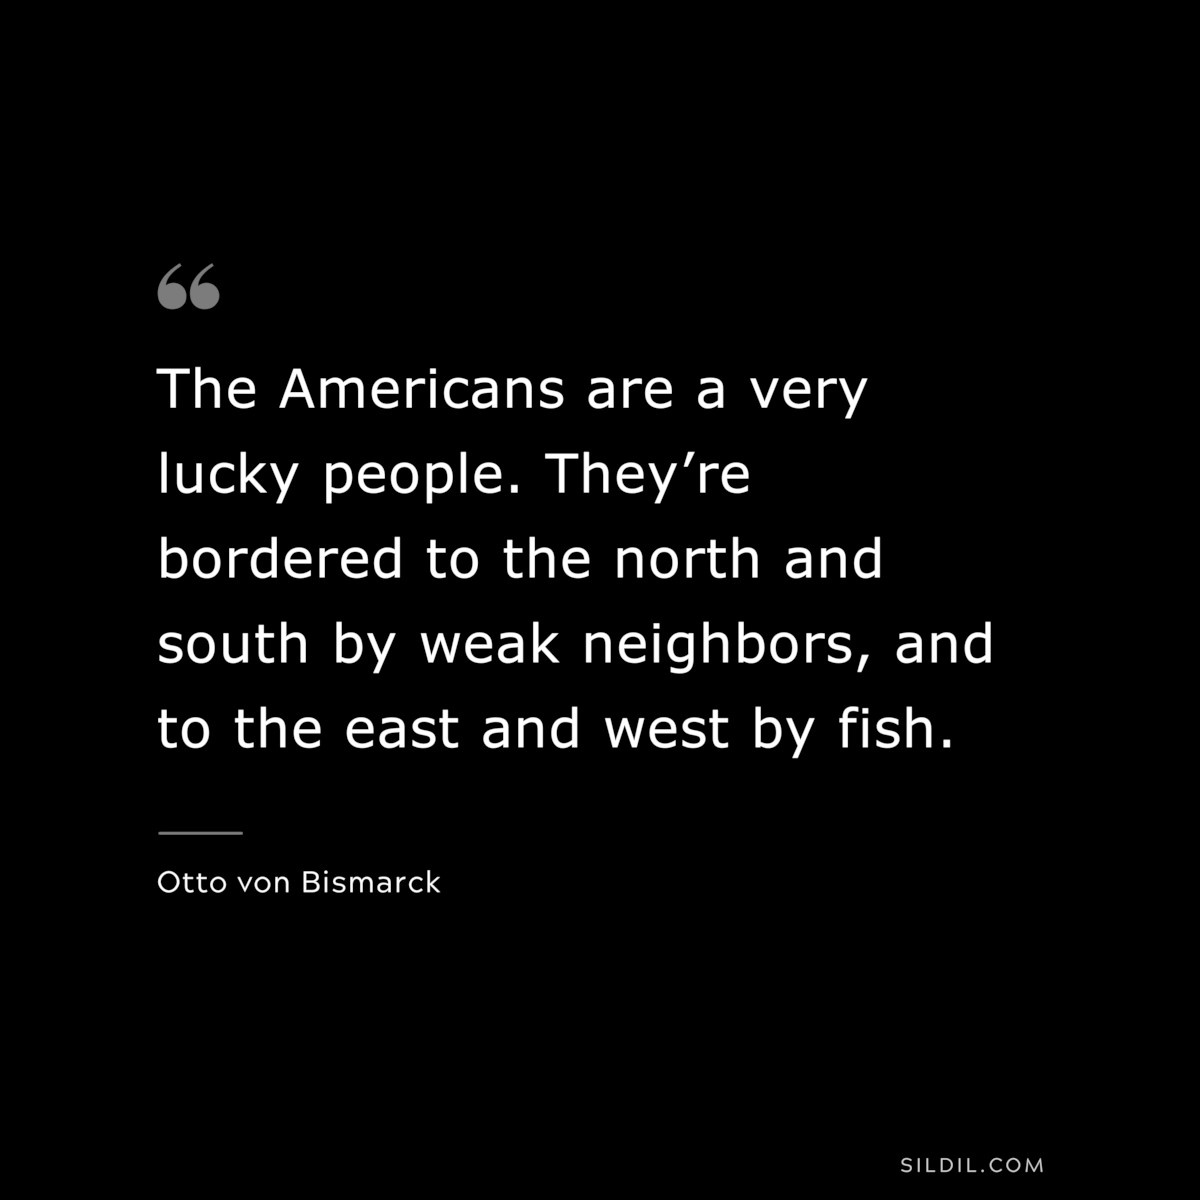 The Americans are a very lucky people. They’re bordered to the north and south by weak neighbors, and to the east and west by fish. ― Otto von Bismarck